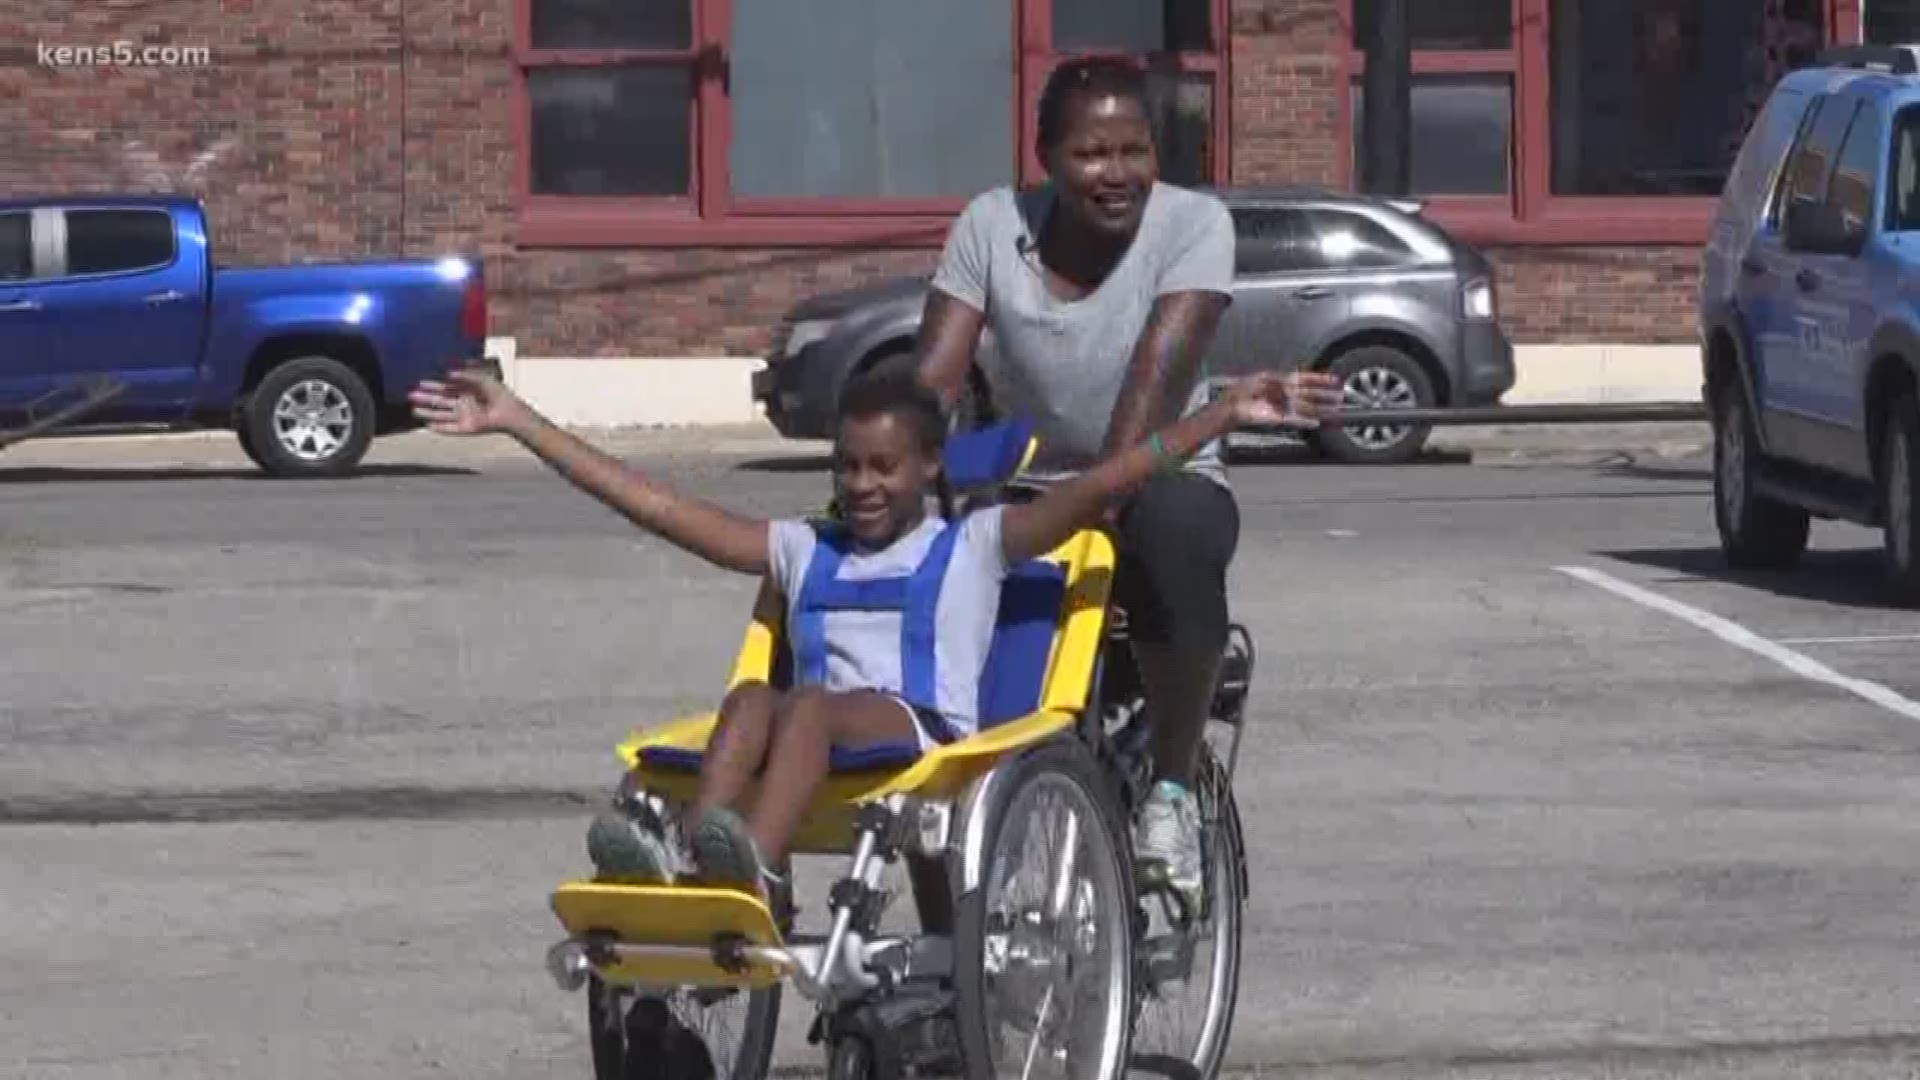 The Believe It Foundation launches a new bike program for children with physical disabilities.